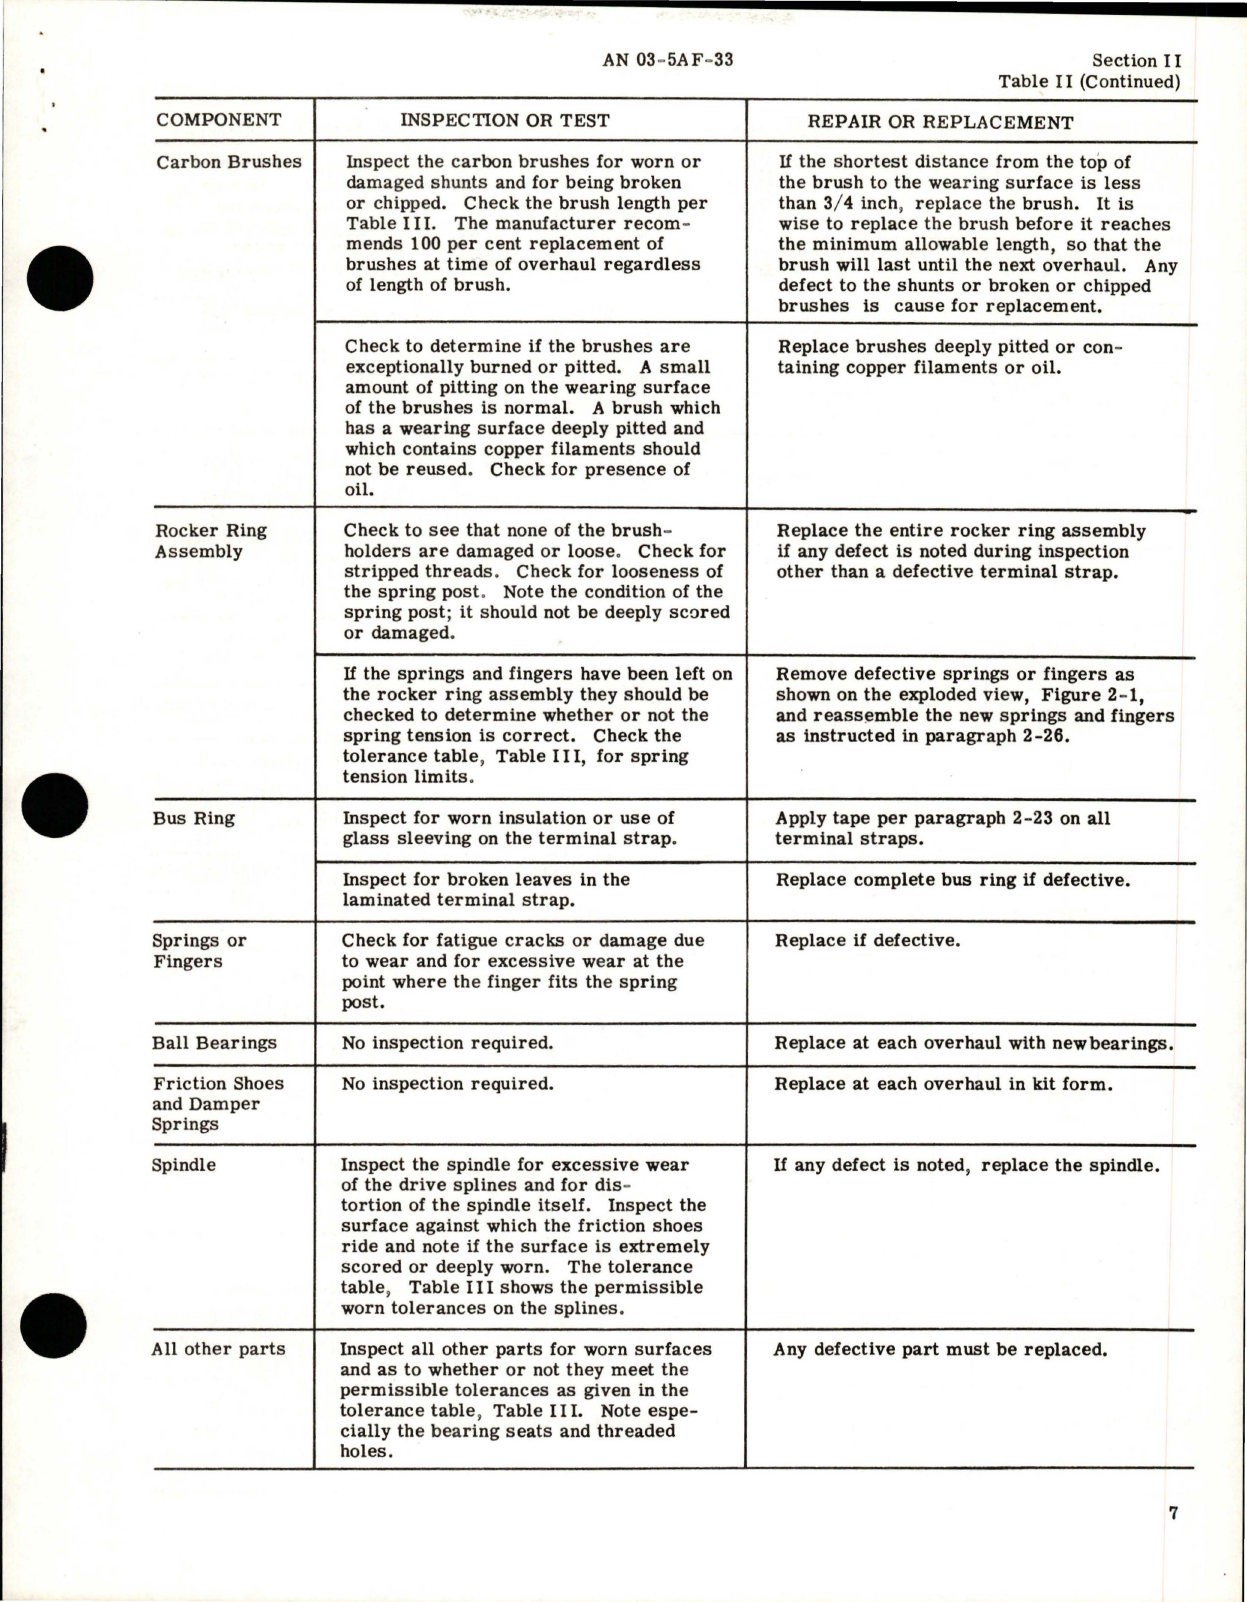 Sample page 9 from AirCorps Library document: Overhaul Instructions for DC Generator - Part A28A85841, AN 3633-1, A35A9103 and A45J247